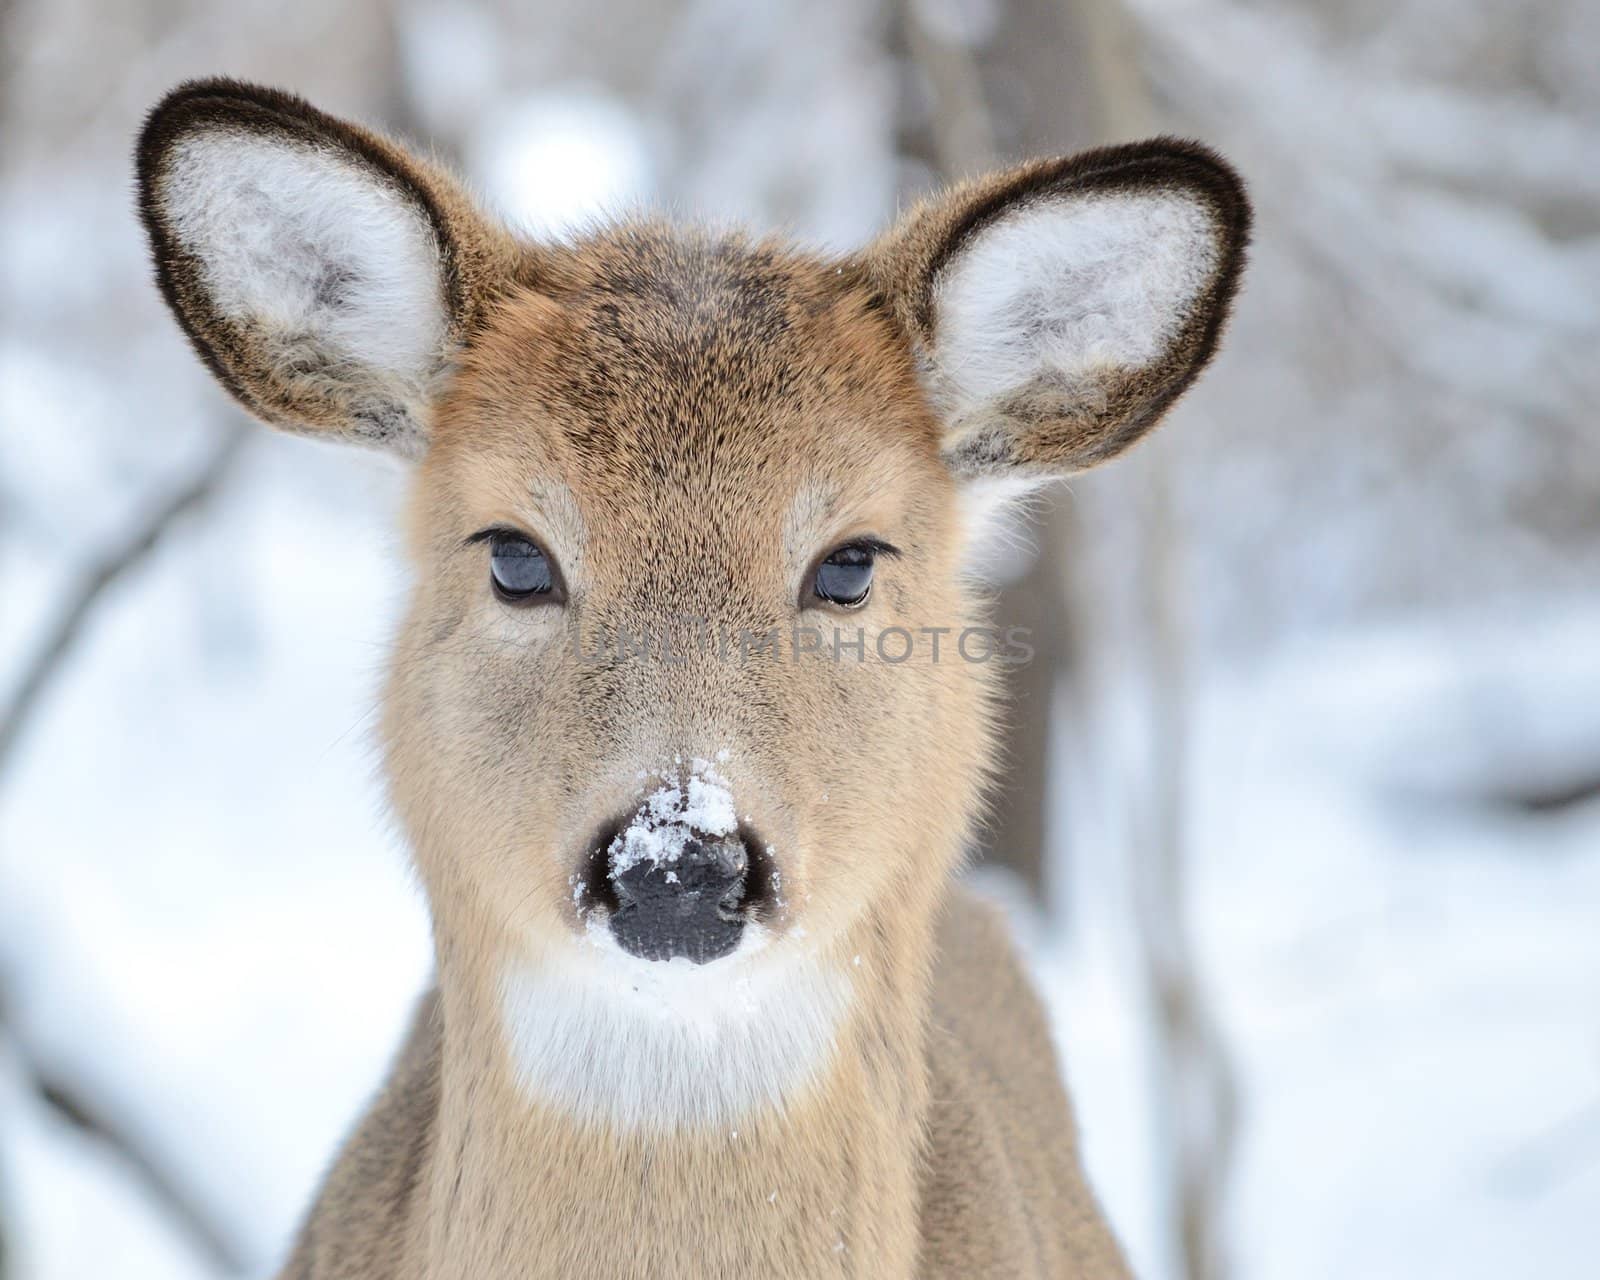 Whitetail Deer Yearling by brm1949